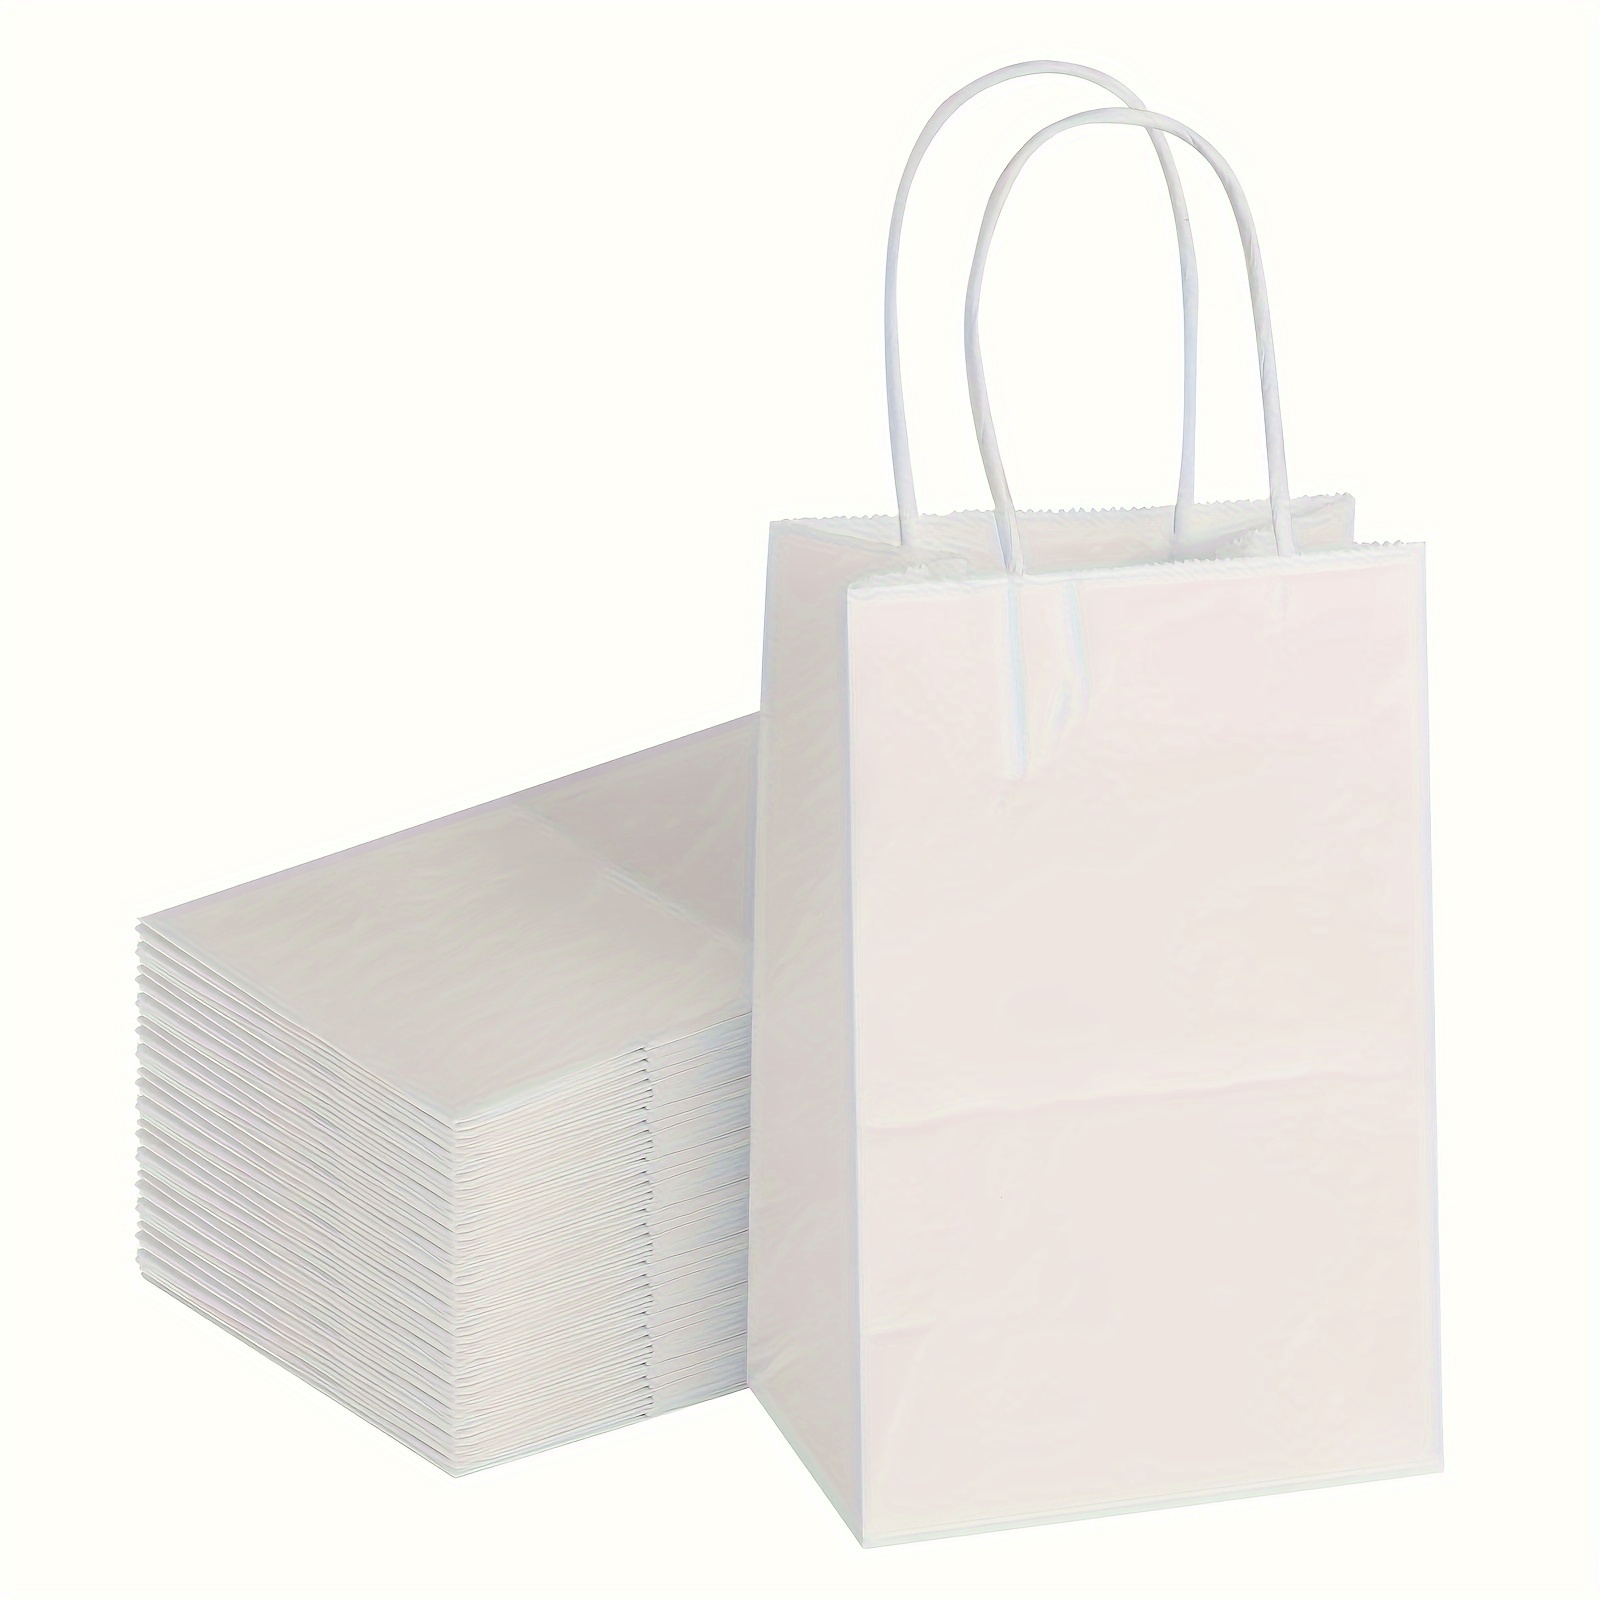 

Value Pack 50pcs White Small Gift Bags Bulk, 5.2x3.5x8 Inches, Paper Gift Bags With Handles, Paper Shopping Bags, Retail Bags, Bags, Party Favor Bags, Gift Bags